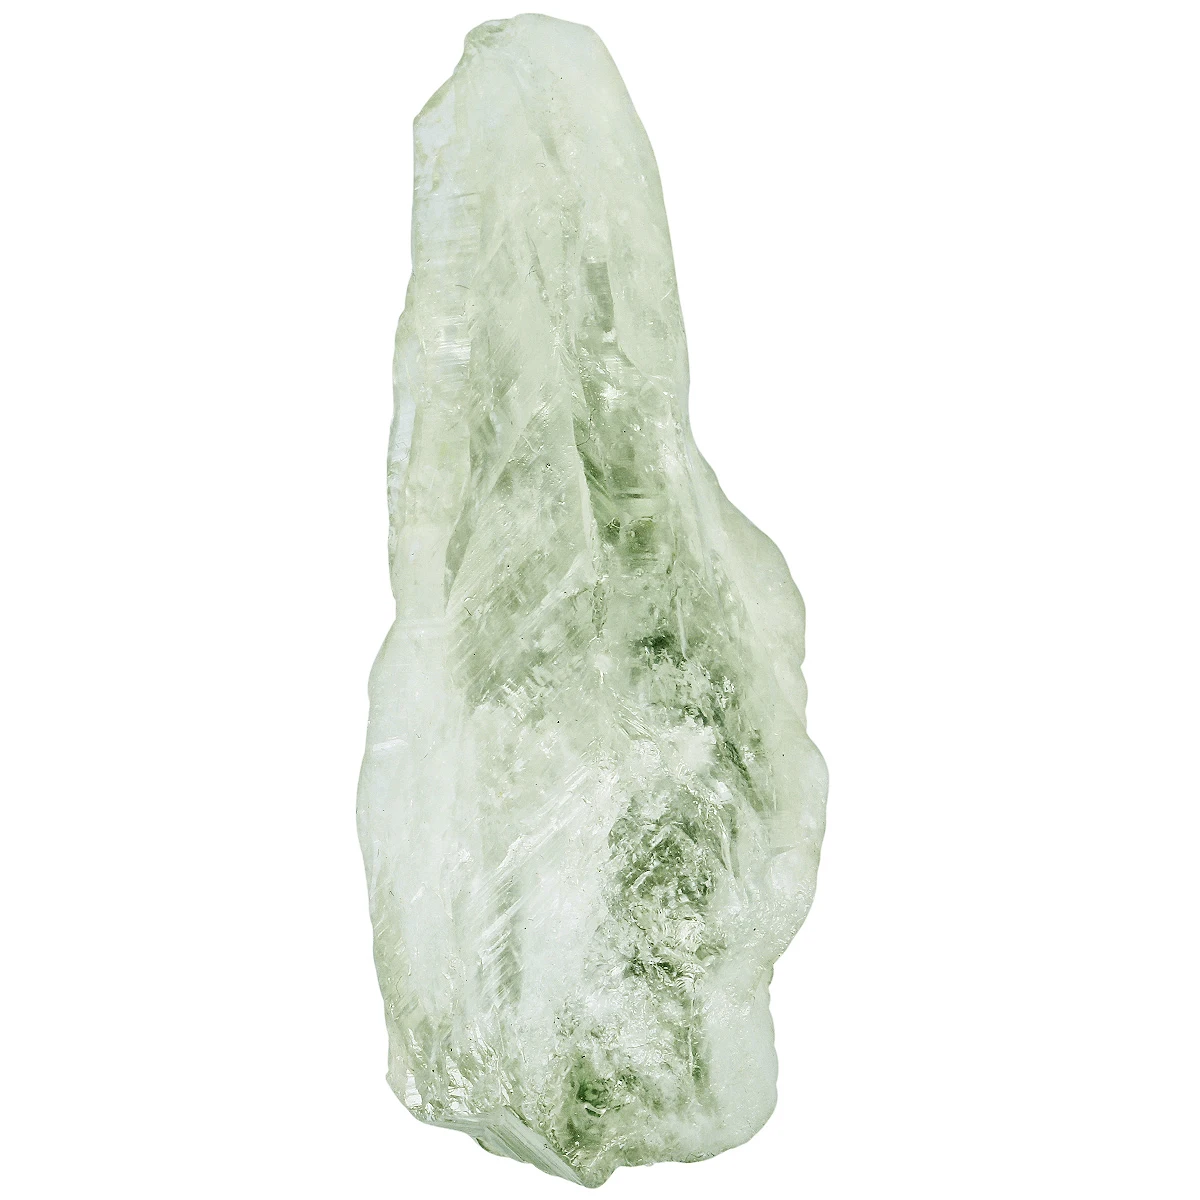 1Pc Irregular Green Crystal Quartz Point Wand Healing Rough Stone Minerals Specimen For Home Decor DIY Jewelry Accessories 201 300g natural malachite geode stone healing rough gemstone specimen home decor desktop ornaments collection